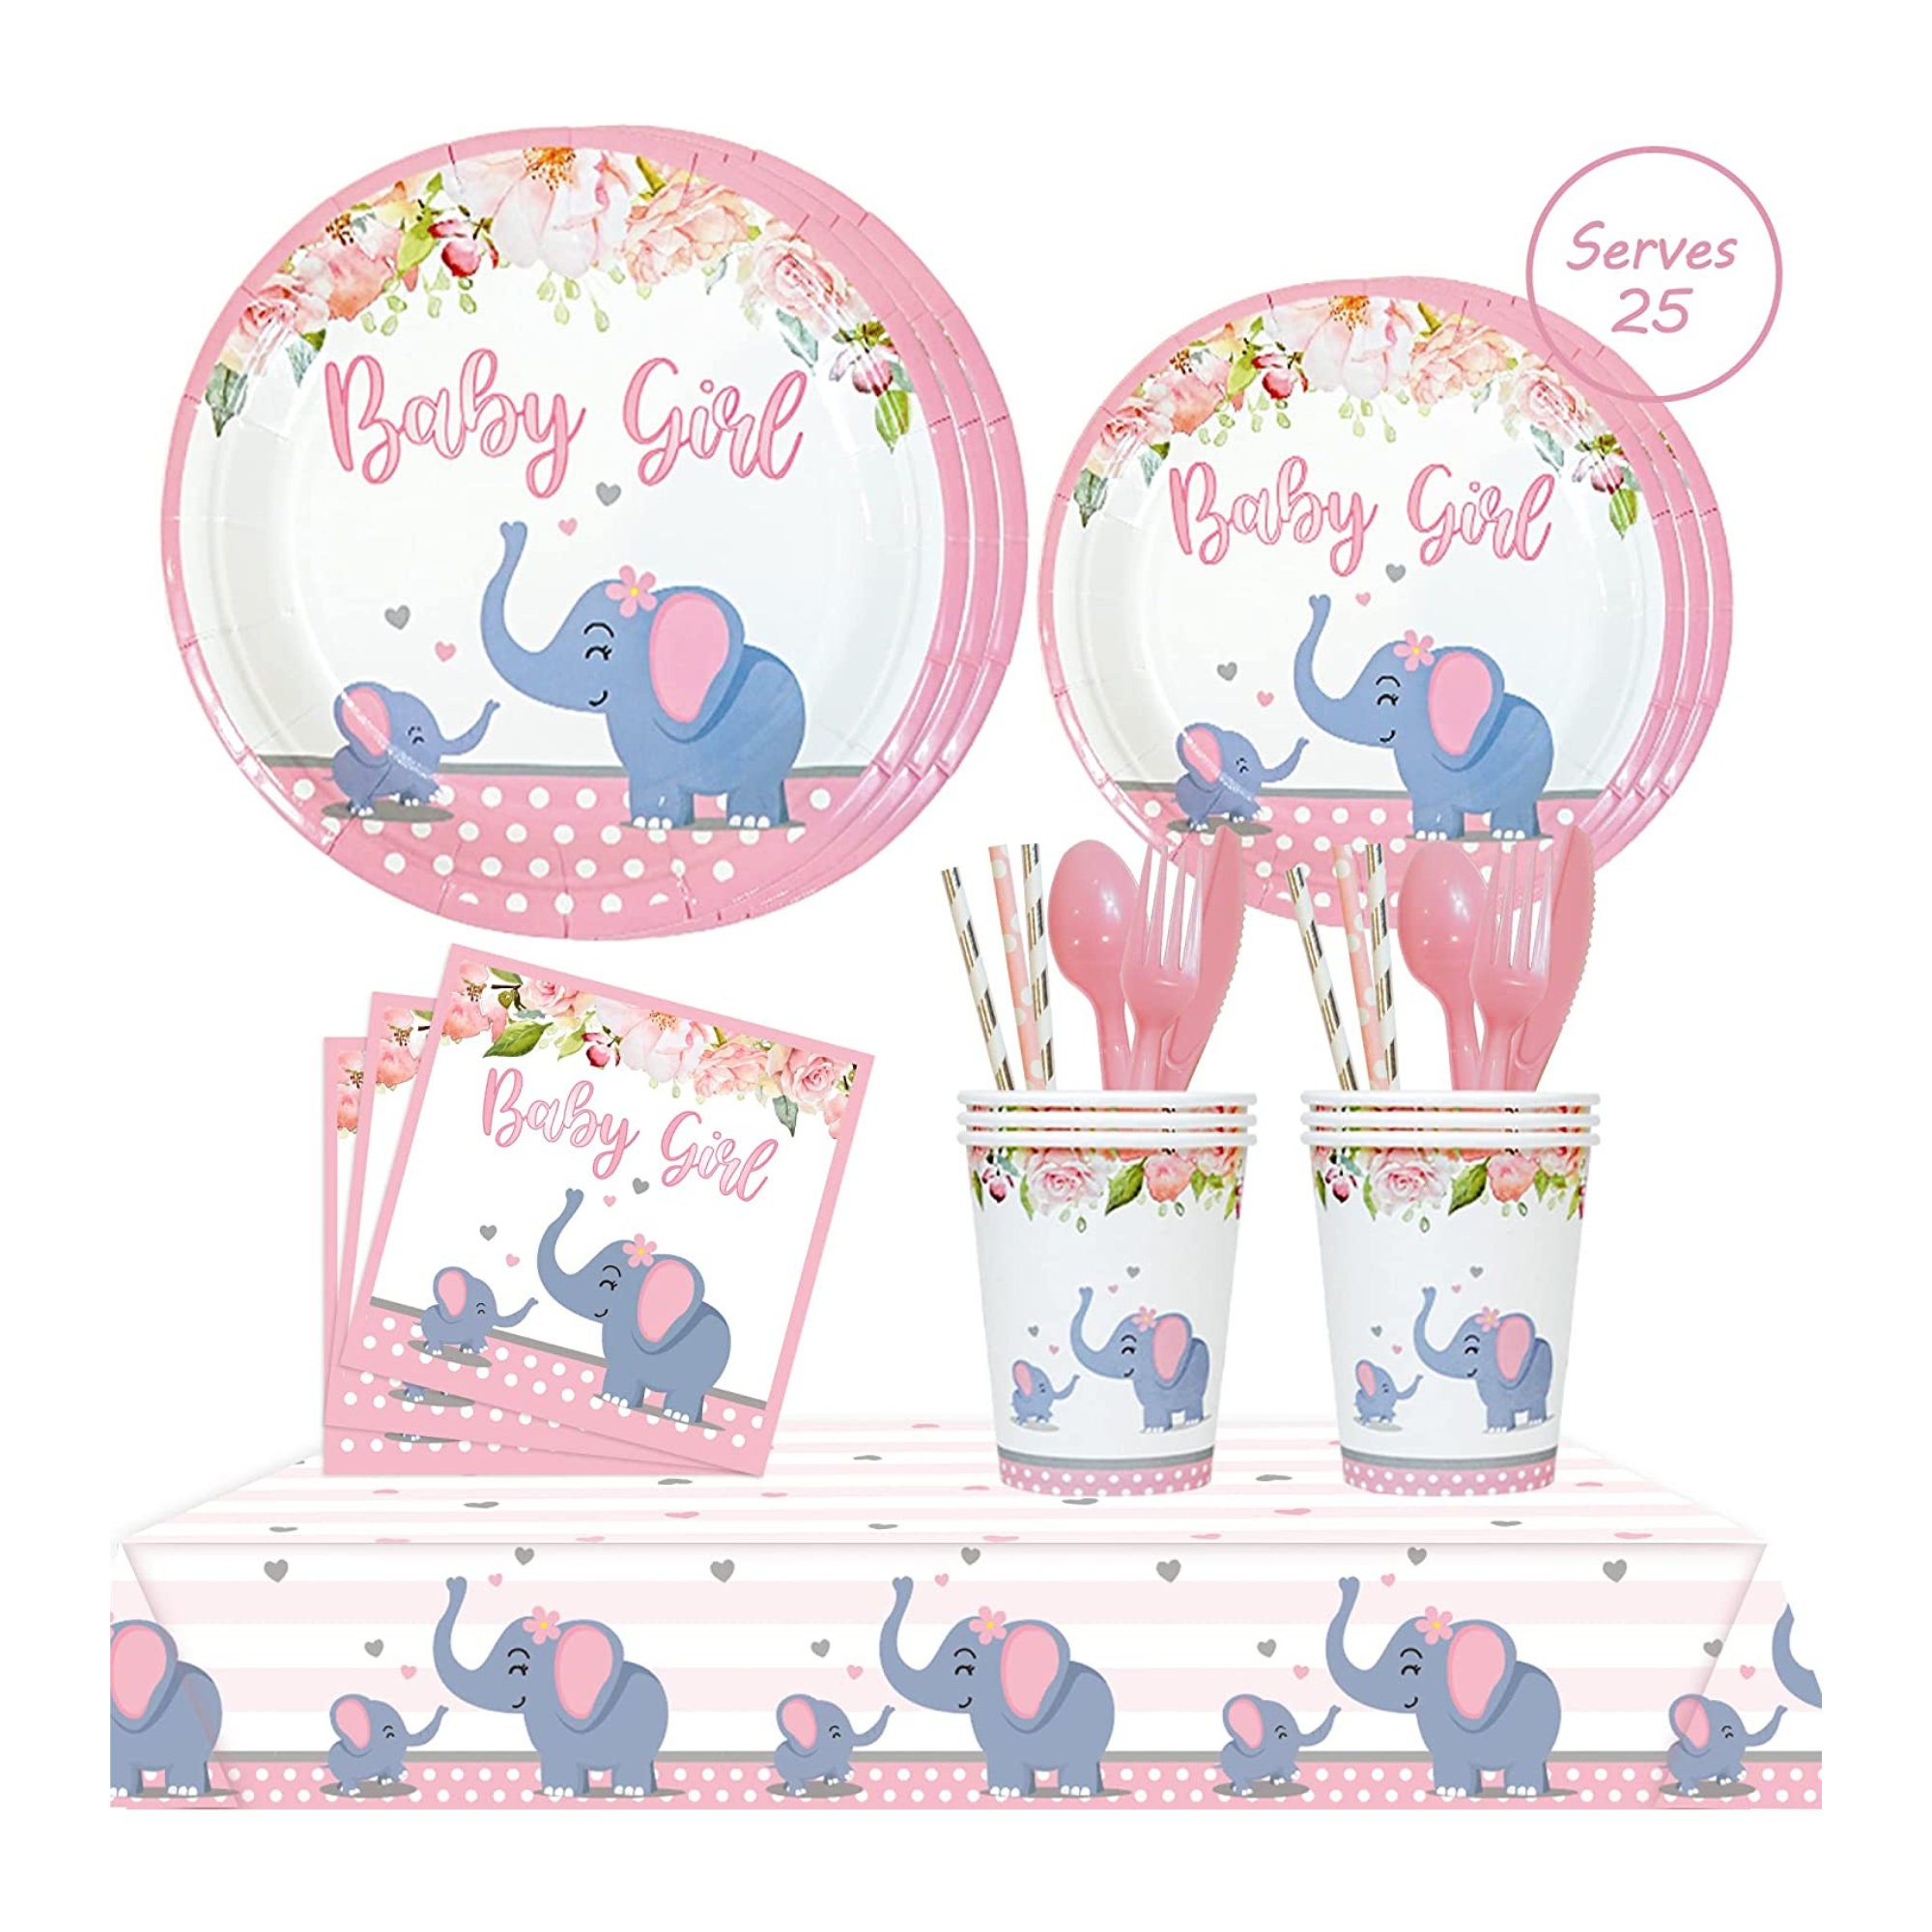 Oh Baby Small Paper Plates (Set of 8)